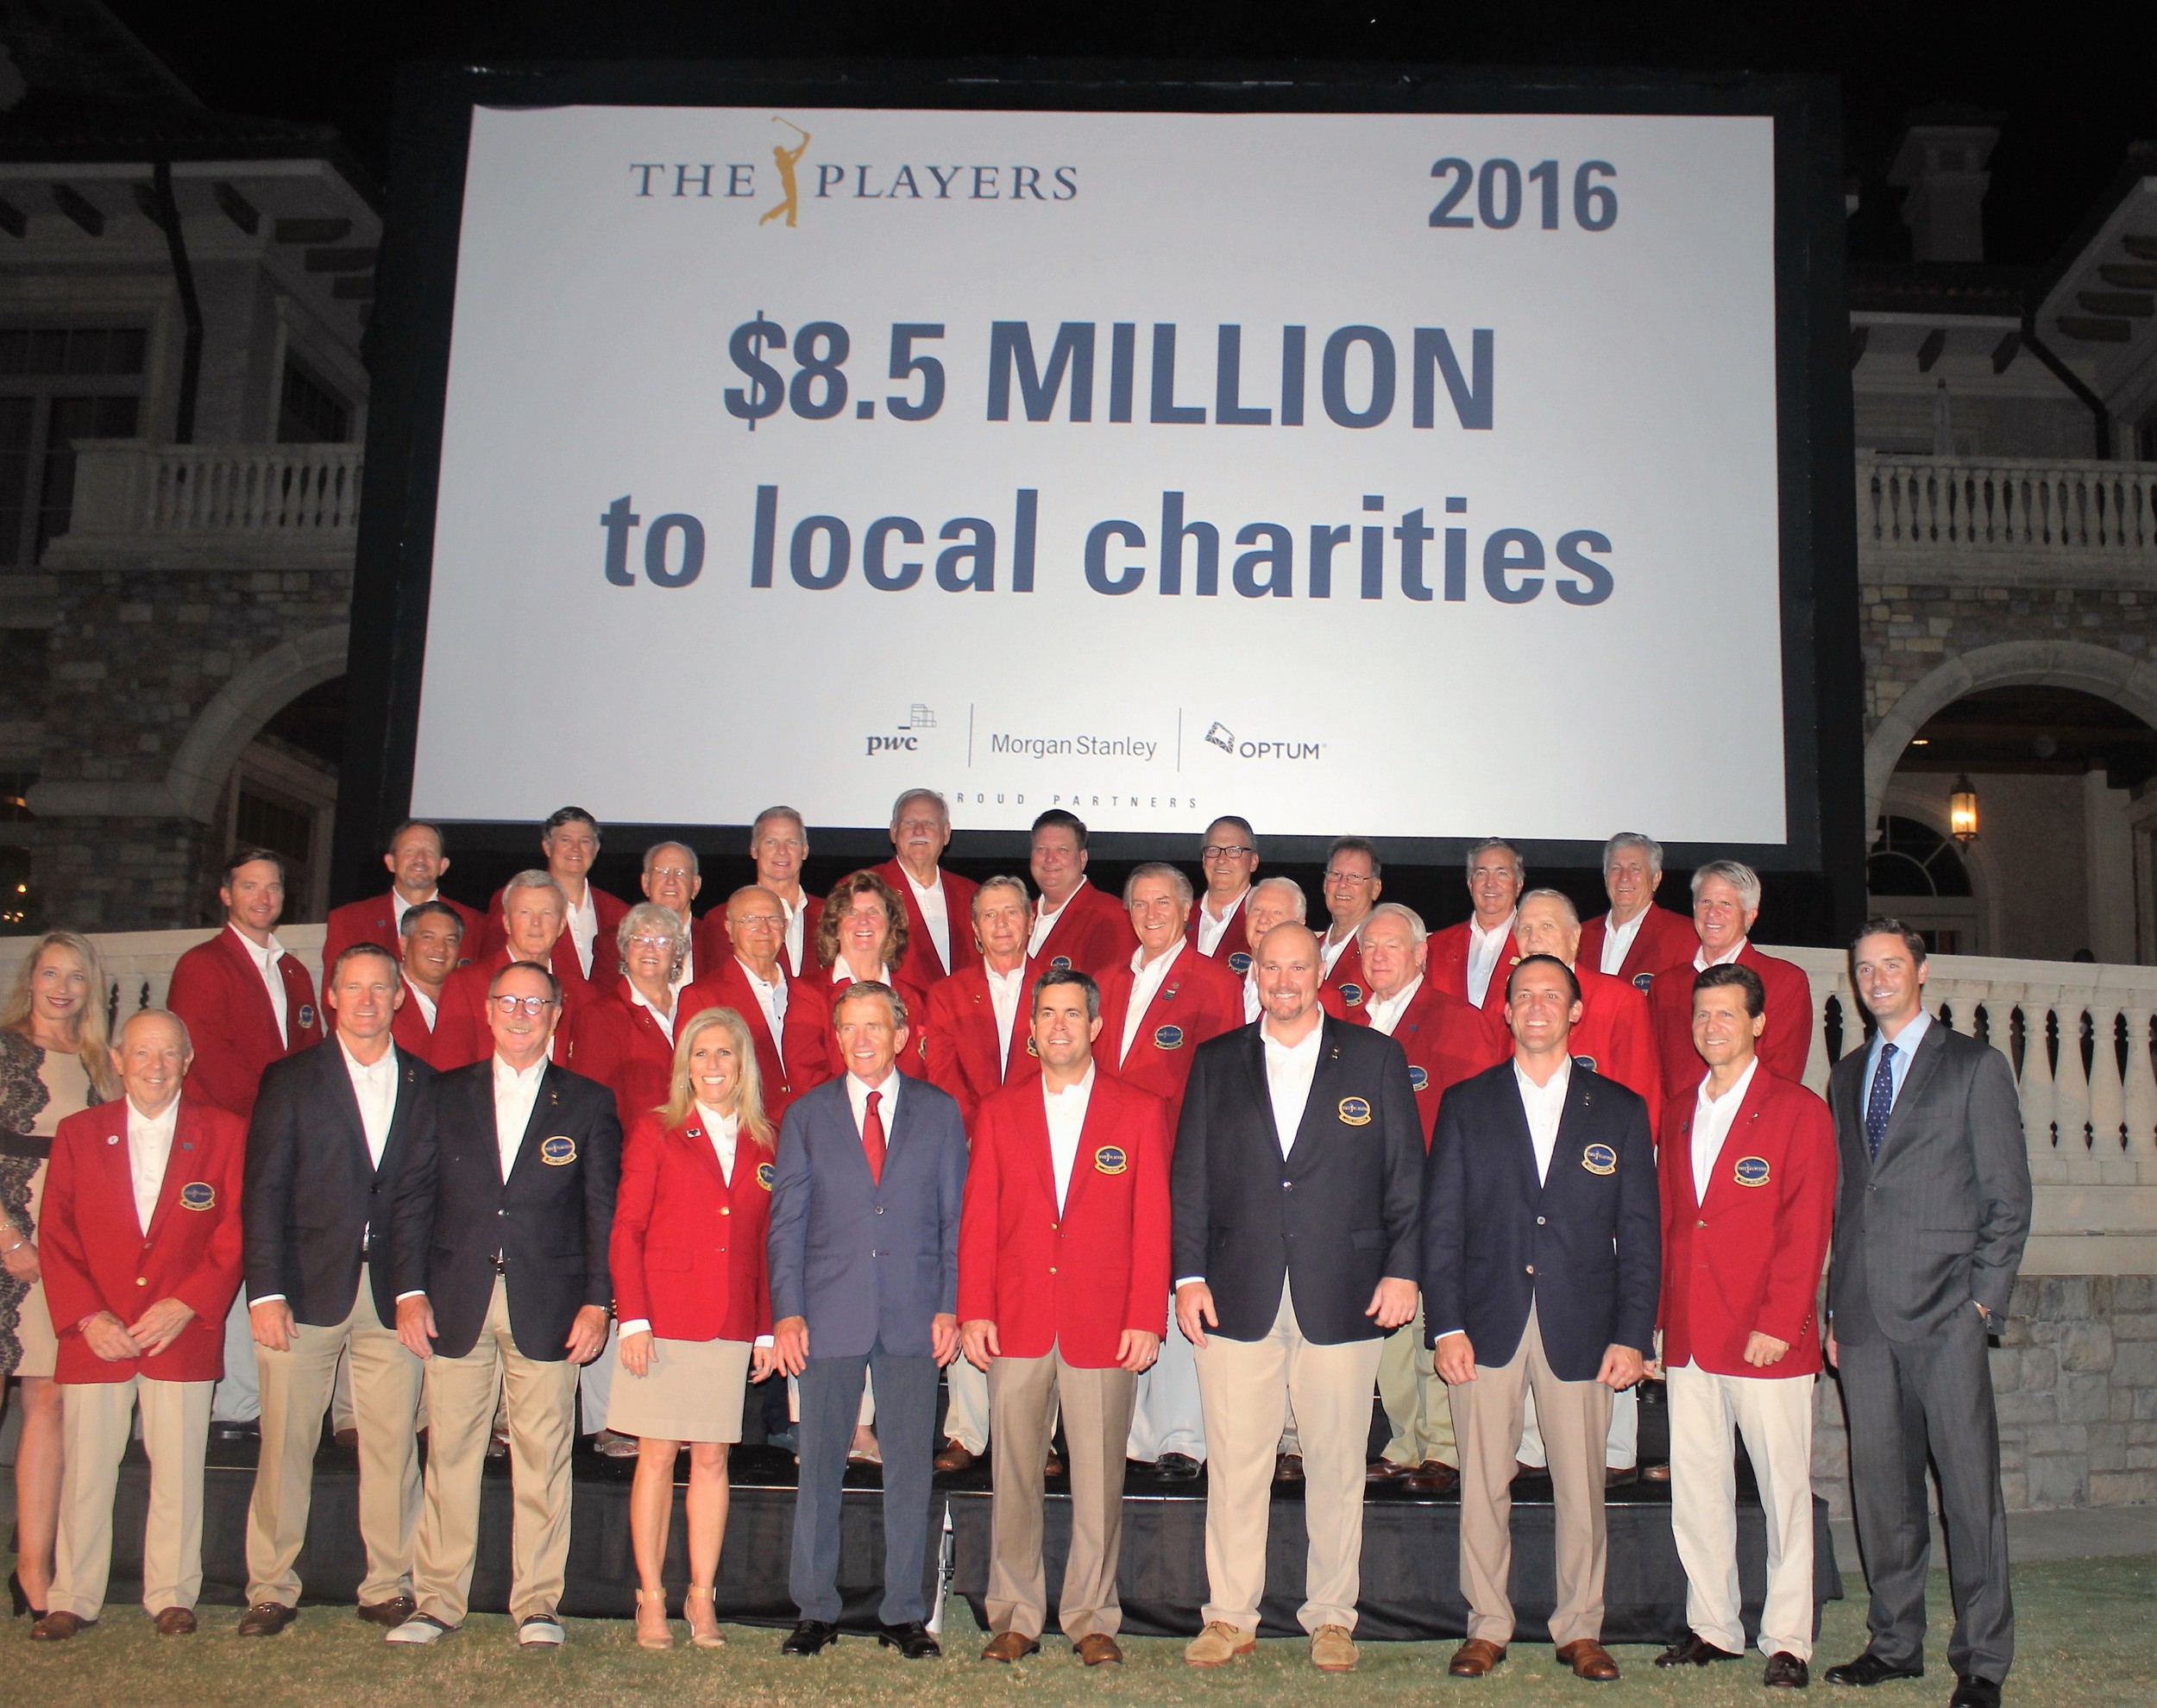 THE PLAYERS Charity Celebration was the setting for the announcement that the 2016 tournament raised $8.5 million for local charities.